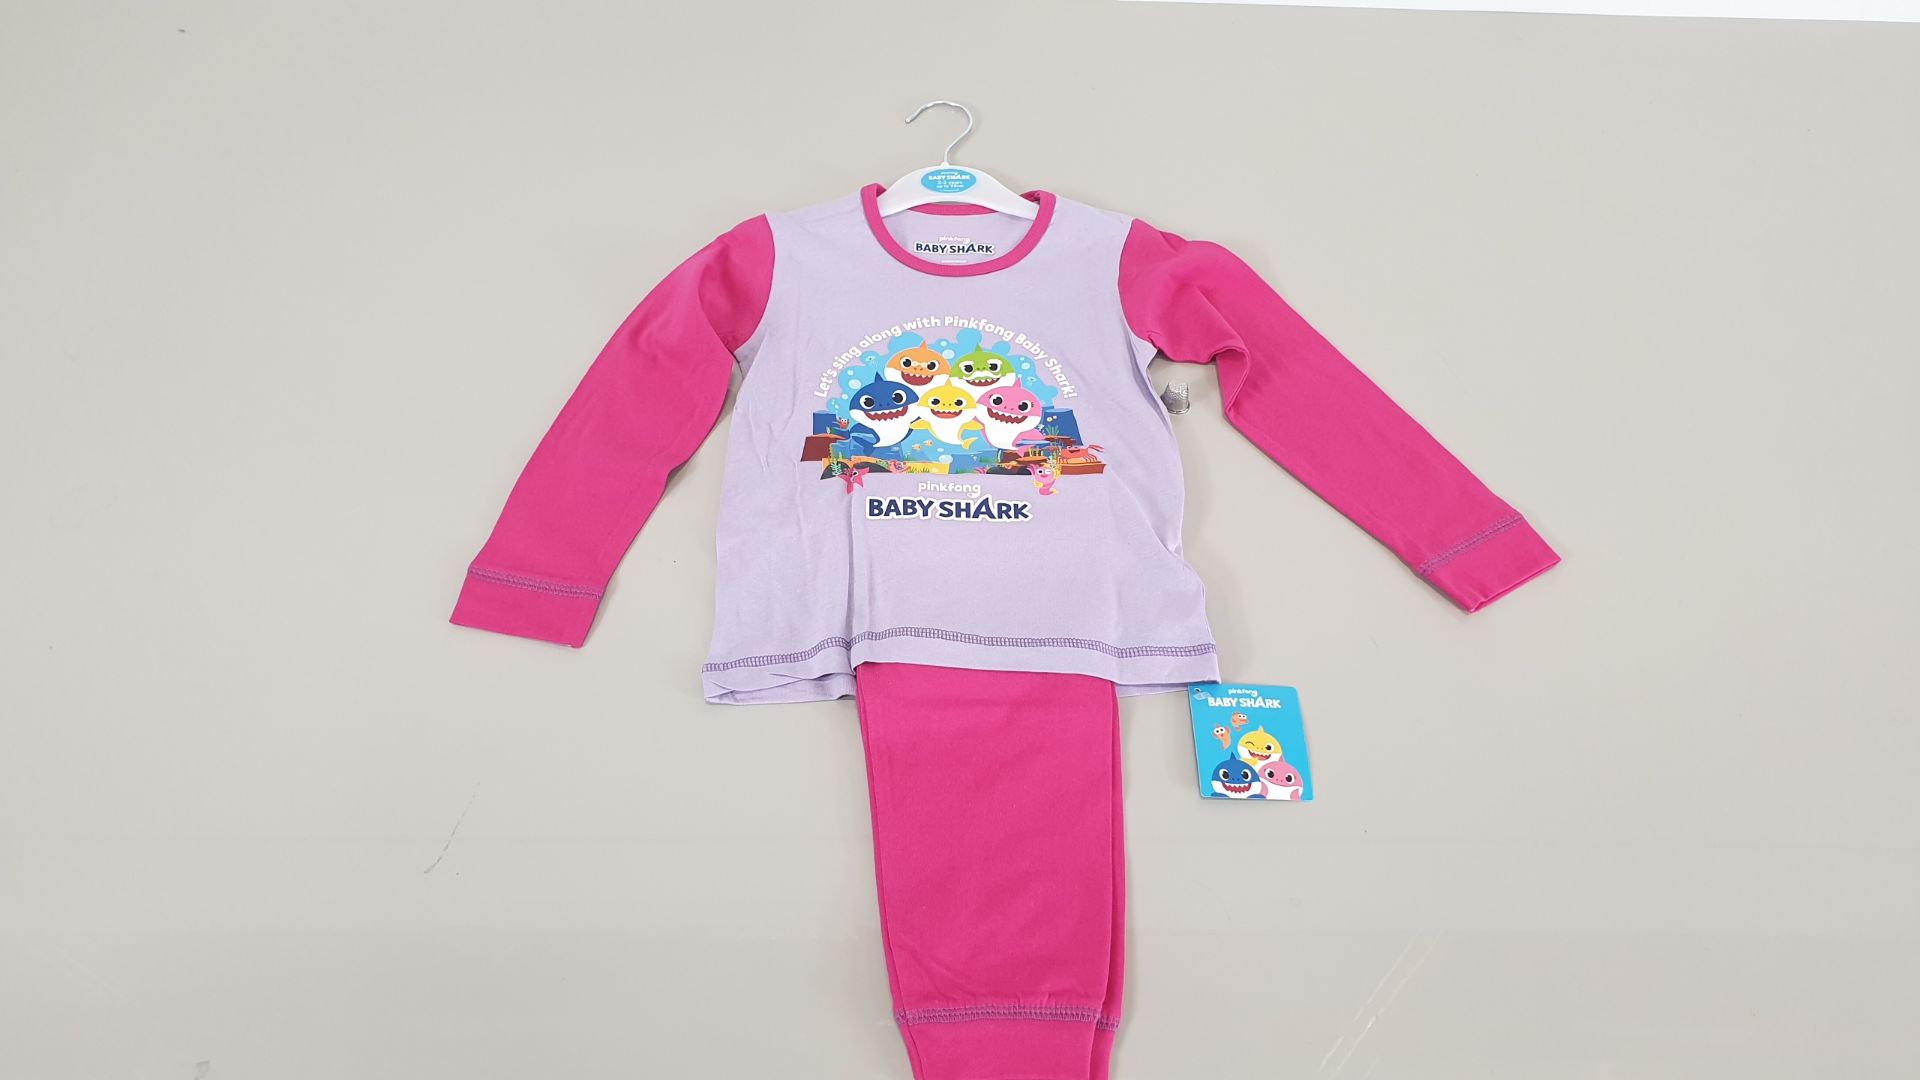 (LOT FOR THURSDAY 28TH MAY AUCTION) 8 X PINKFONG BABY SHARK PYJAMA SETS ASSORTED SIZES 2 - 5 YEARS